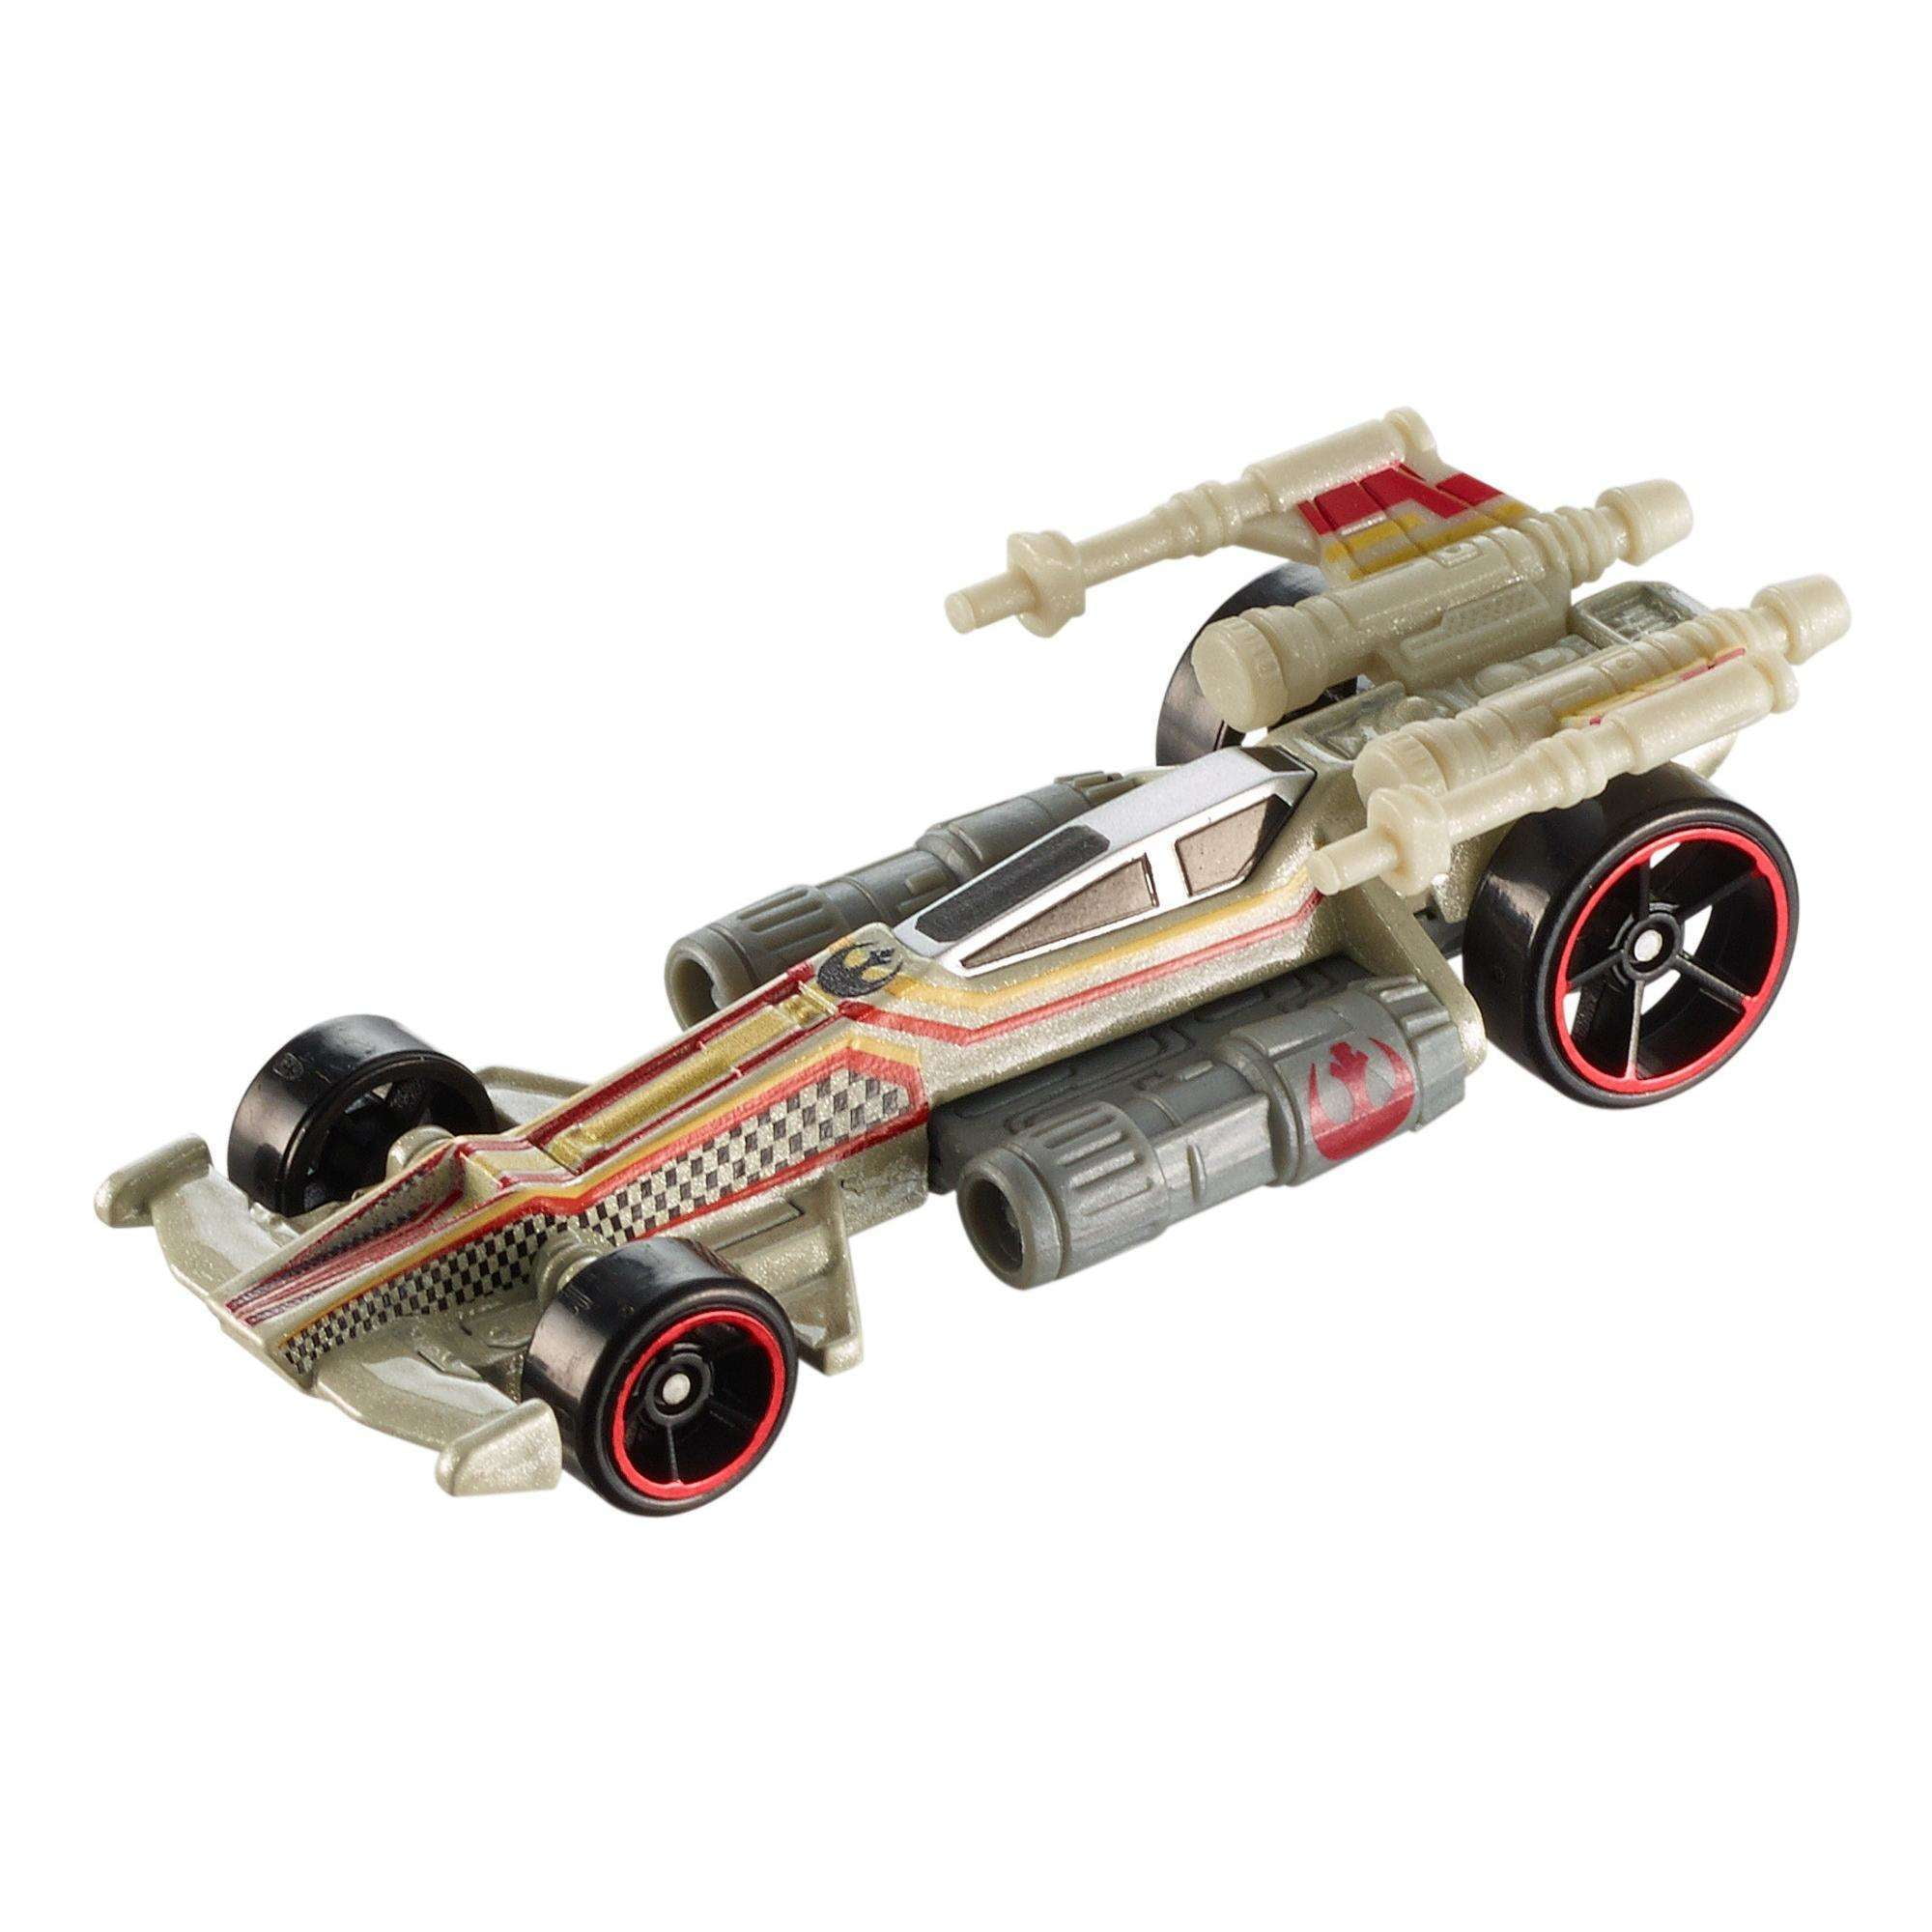 Hot Wheels DPV27 Star Wars Carships Tie Fighter Vehicle for sale online